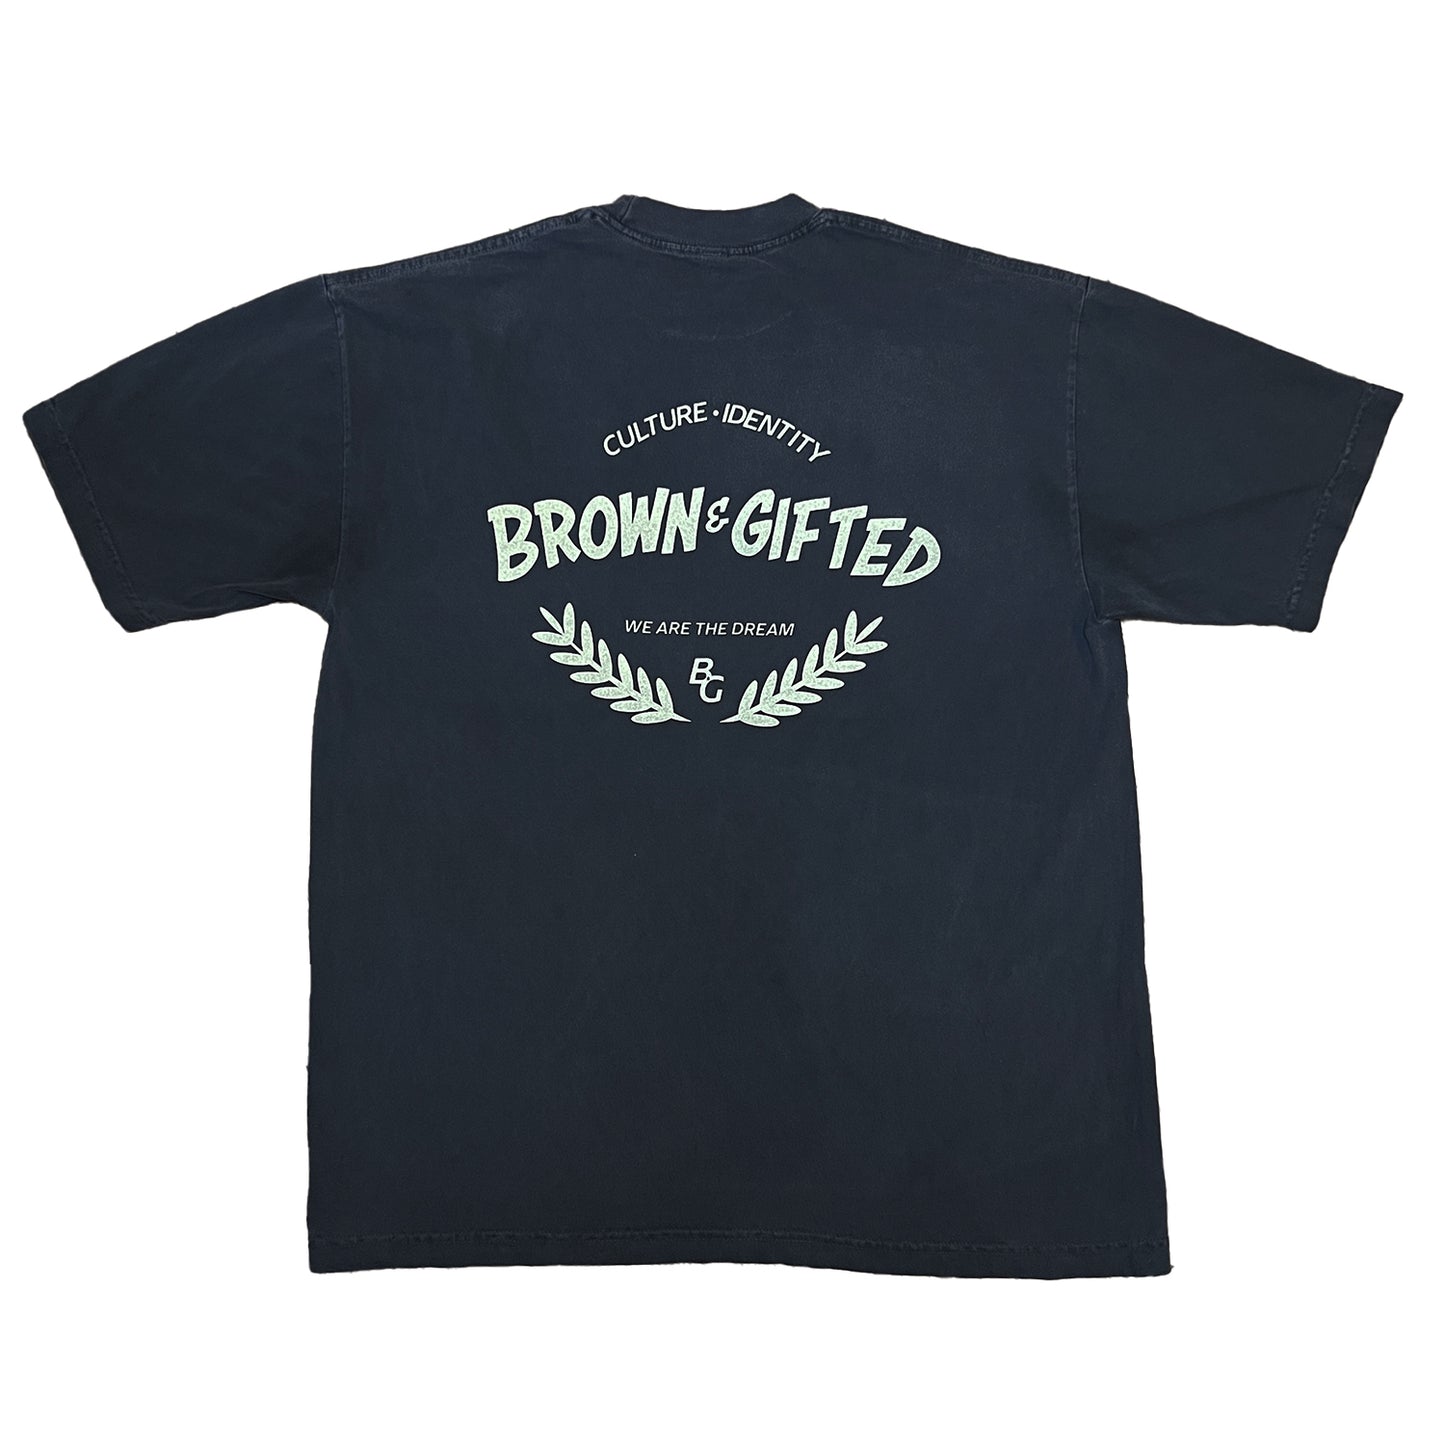 Brown and Gifted: We Are The Dream (Vintage Black)